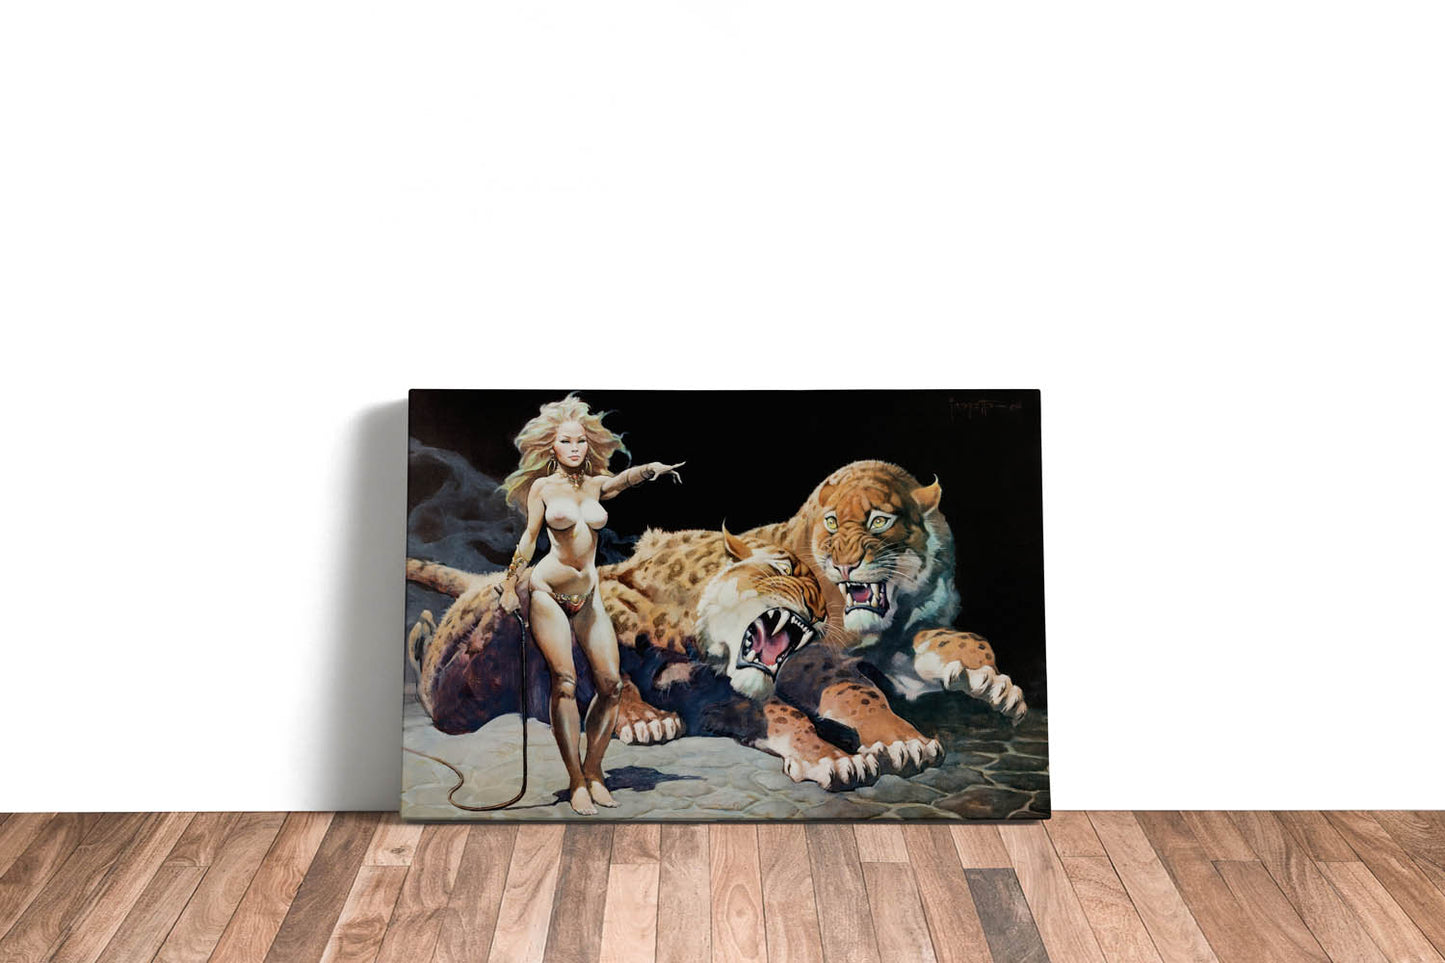 The Countess Large Wrap Around Canvas